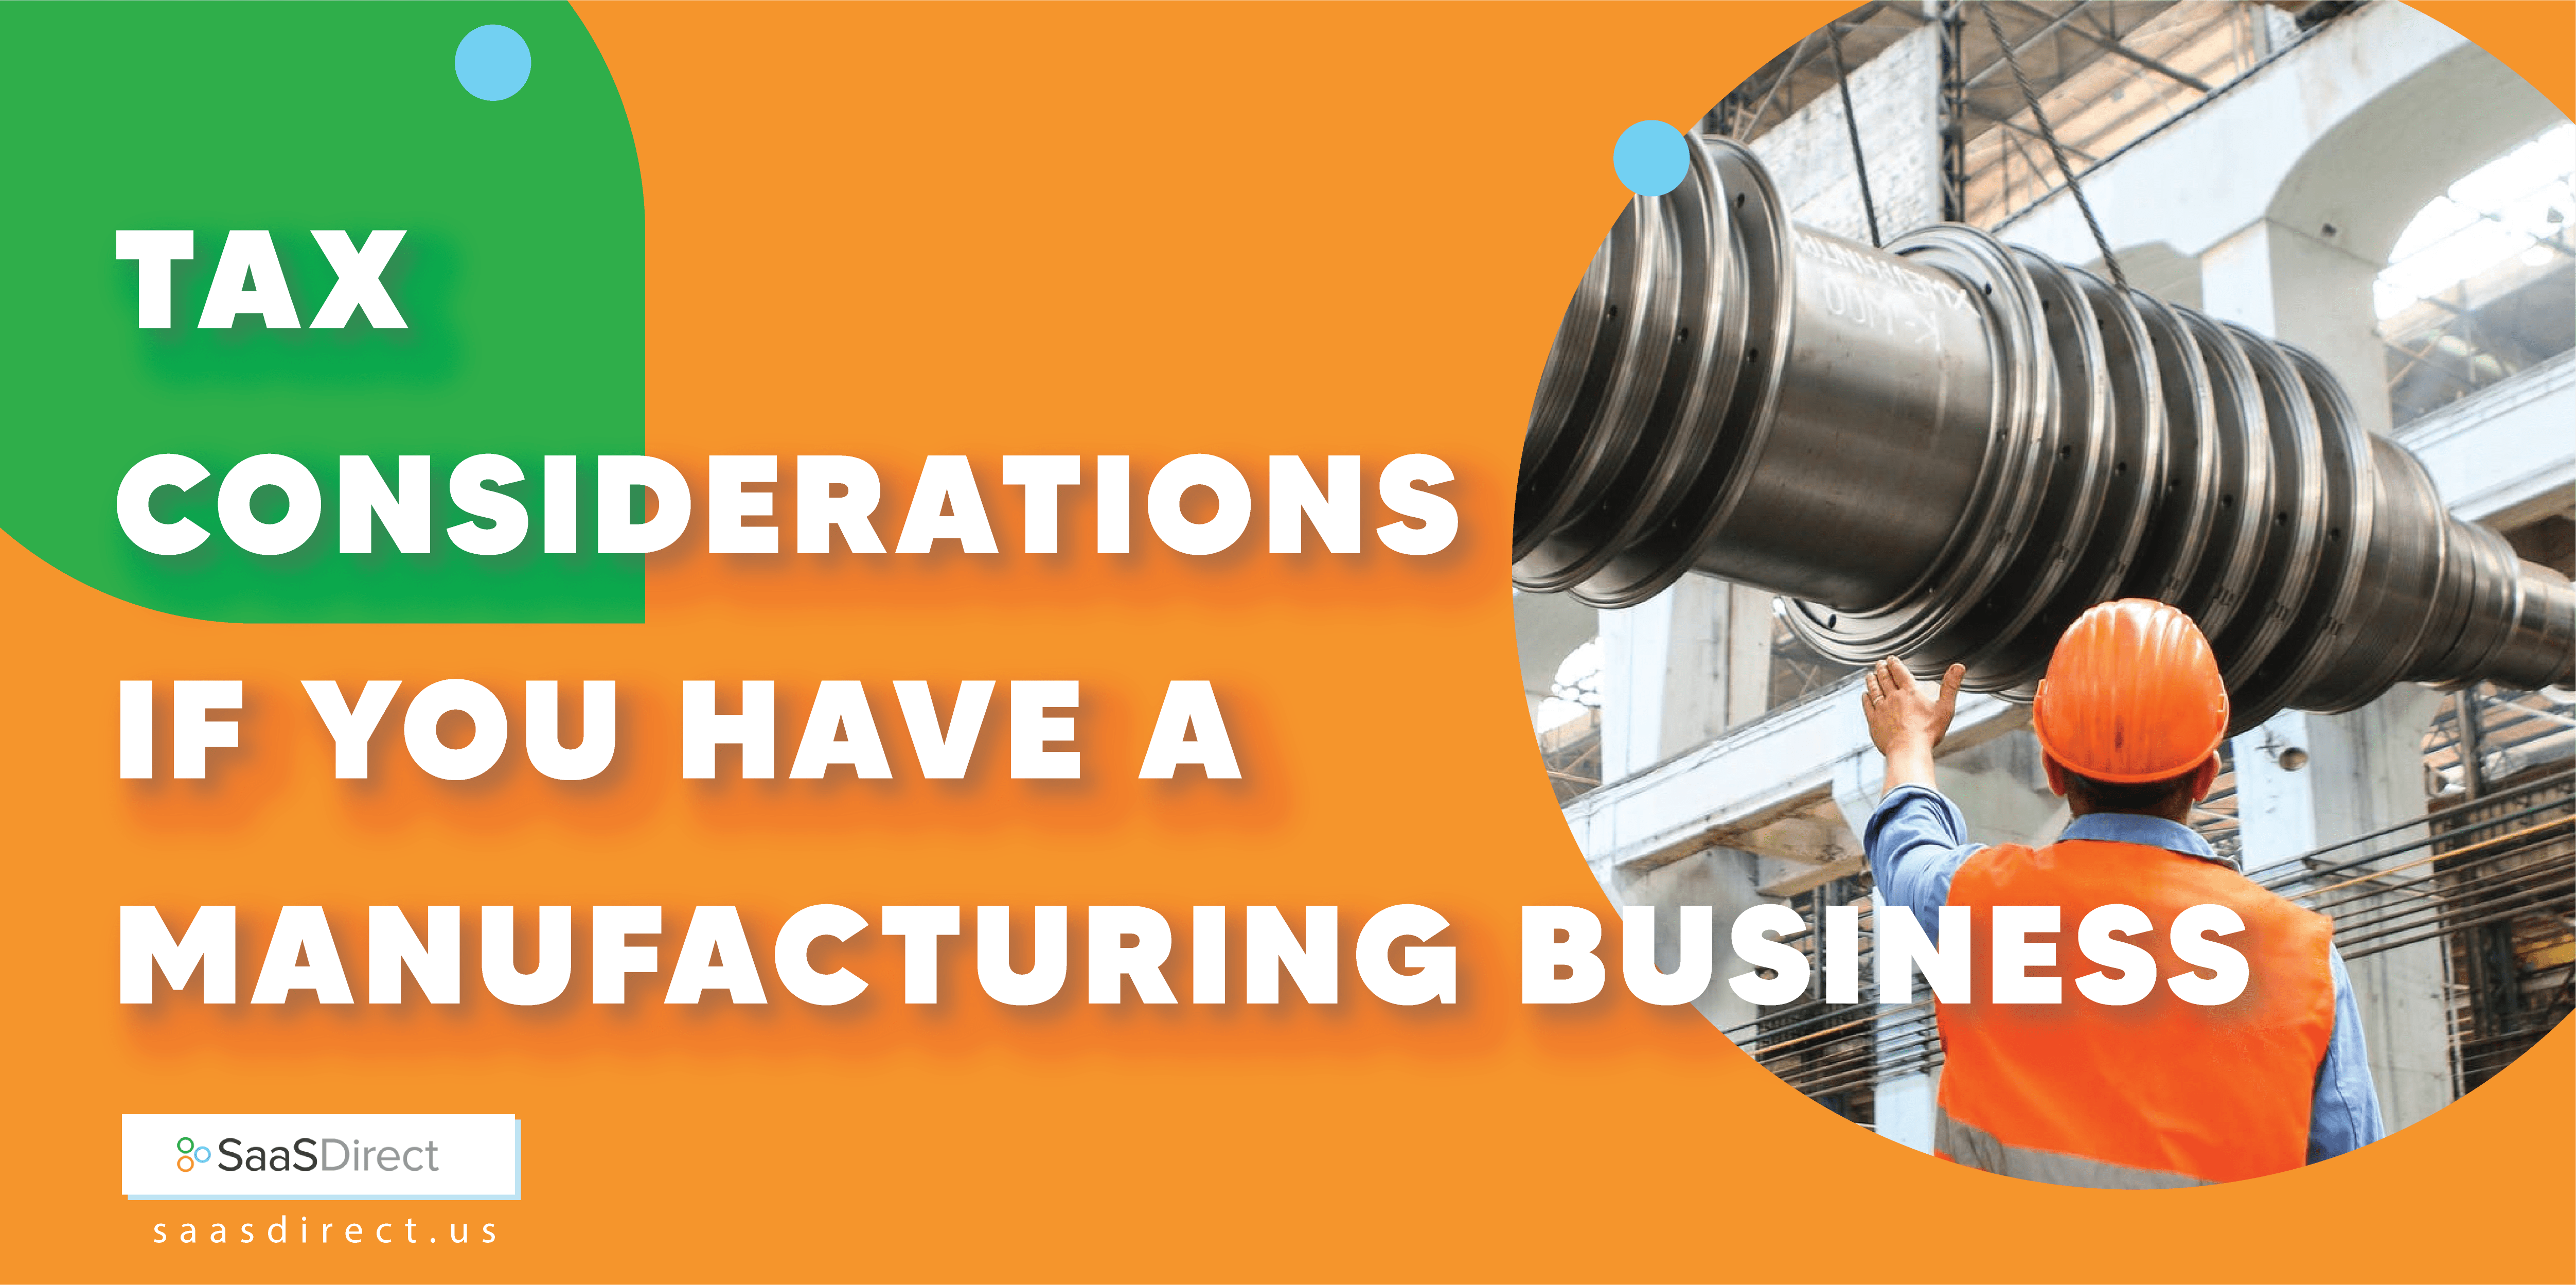 Tax Considerations if You Have a Manufacturing Business